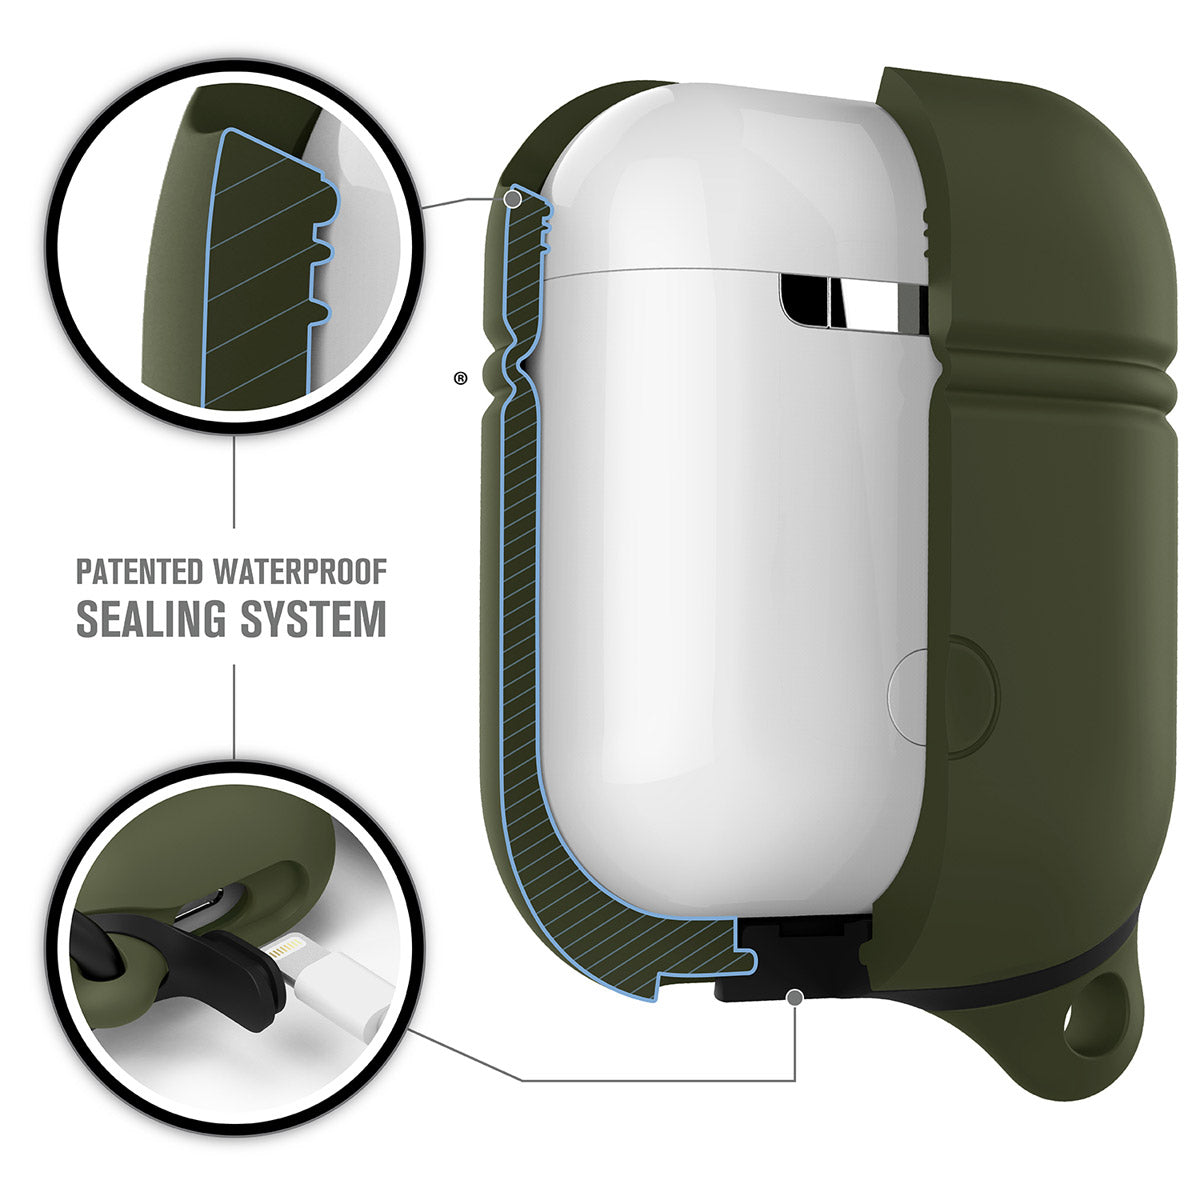 Catalyst airpods gen2/1 waterproof case + carabiner showing the inner materials of the case in army green text reads patented waterproof sealing system